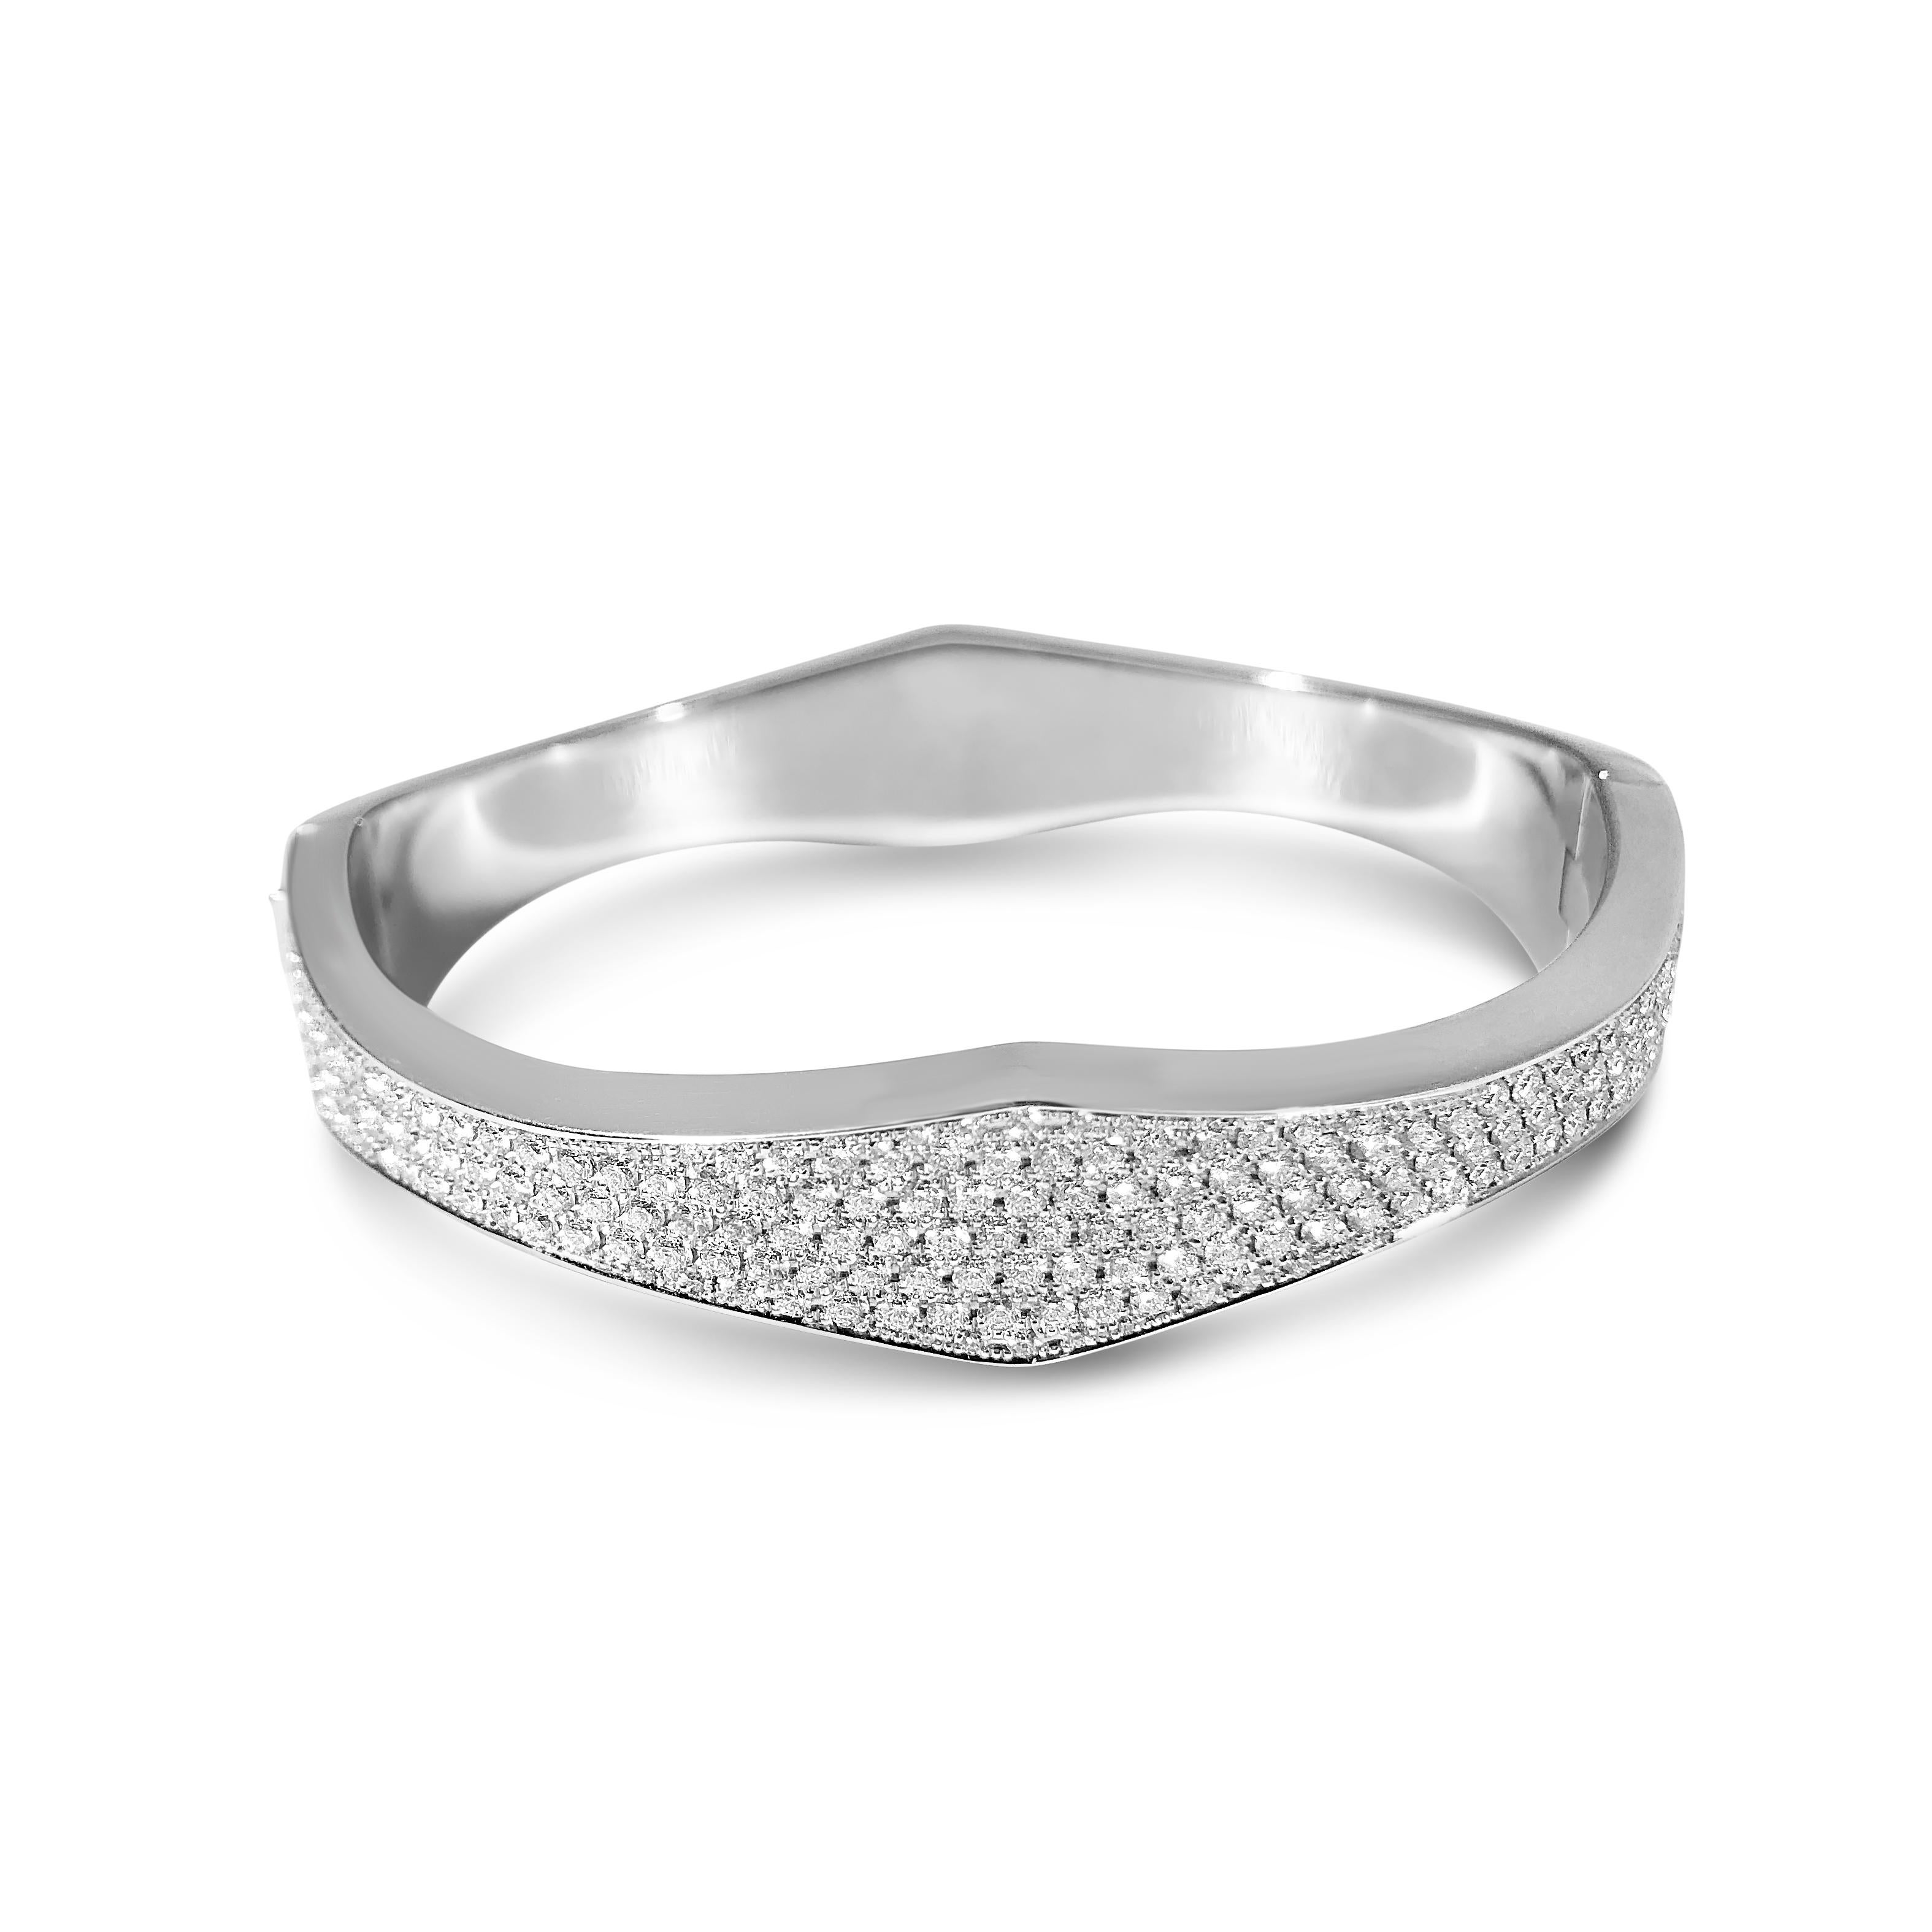 Specifications:
- 18kt White Gold
- Handcrafted in Switzerland
- Customization, made-to-order available in precious stone type, precious metal type, and size 
 (prices may vary)
- Style #: MC 293 OB PAVE BR.3.53

All items on the site are in stock